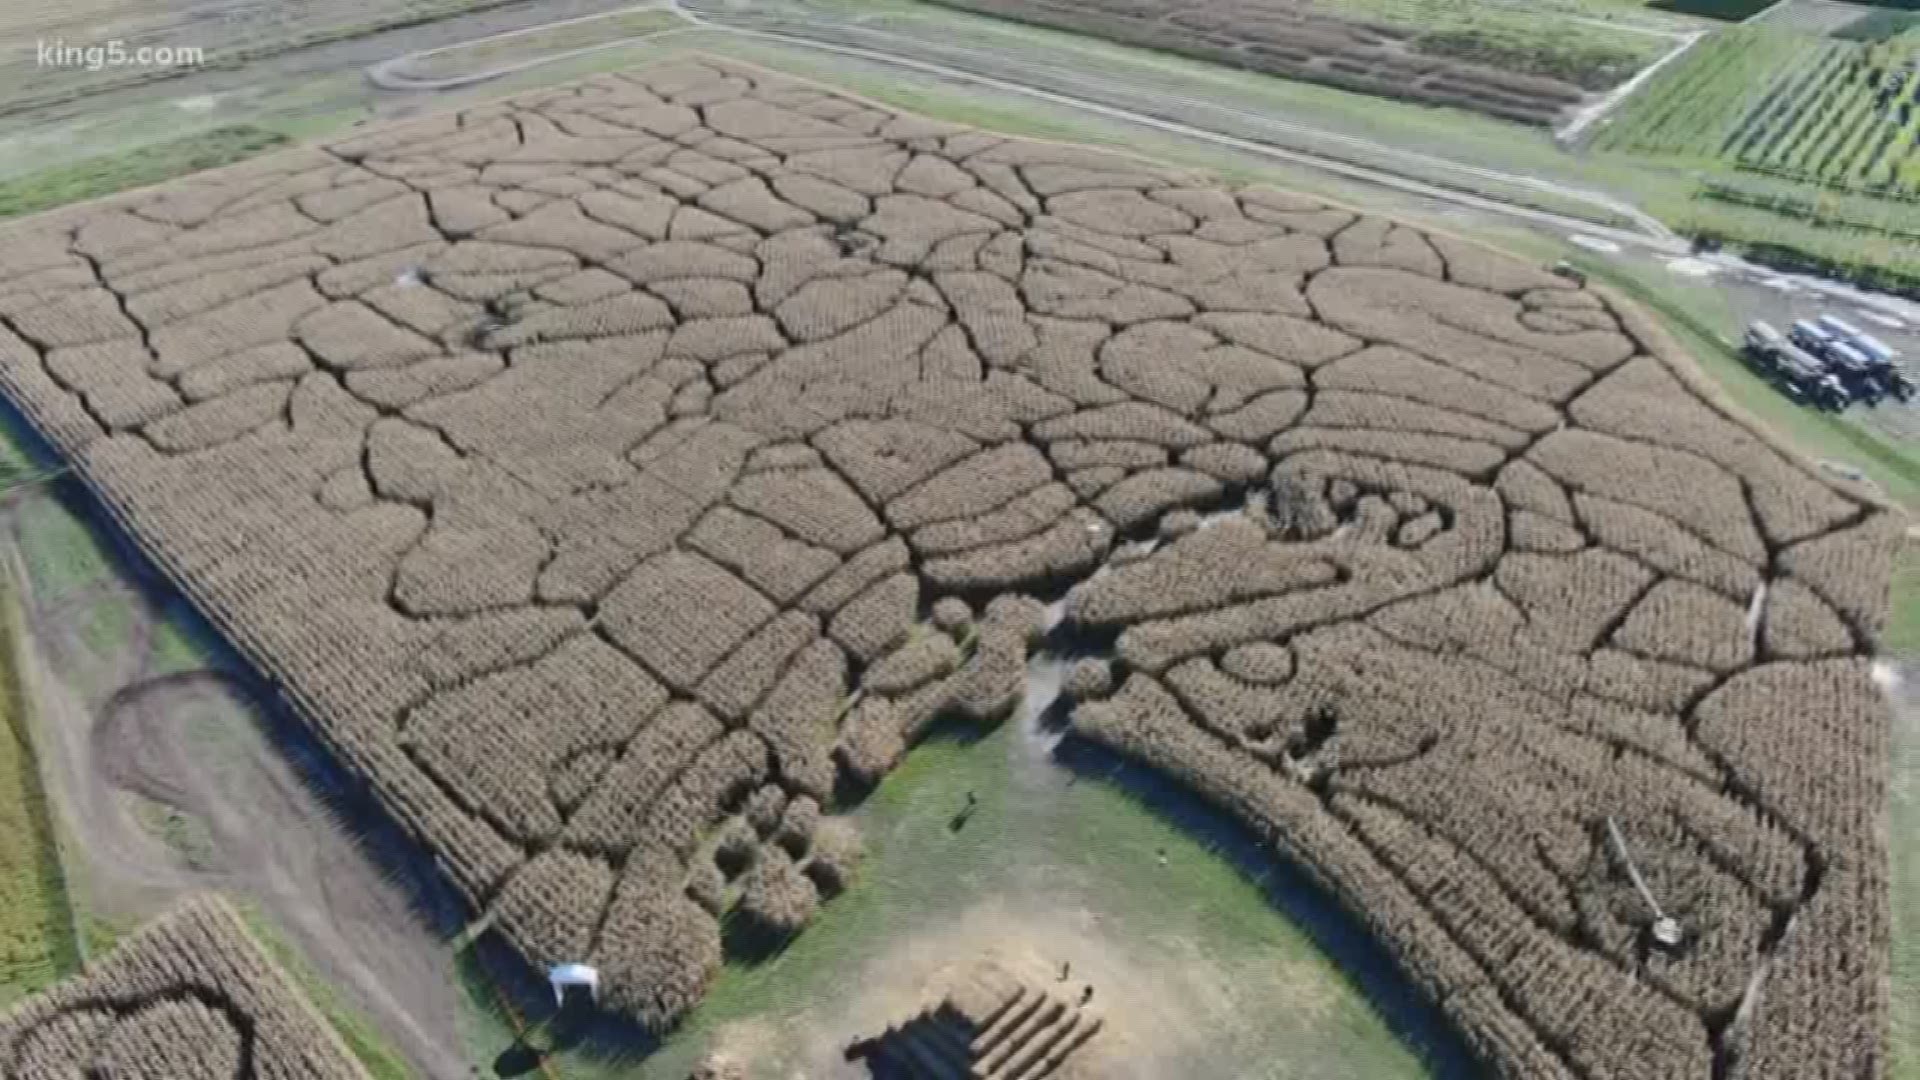 The Farm at Swan’s Trail is celebrating the fall season with a 12-acre, 4.5-mile corn maze that features the geography and iconic landmarks of Washington state.